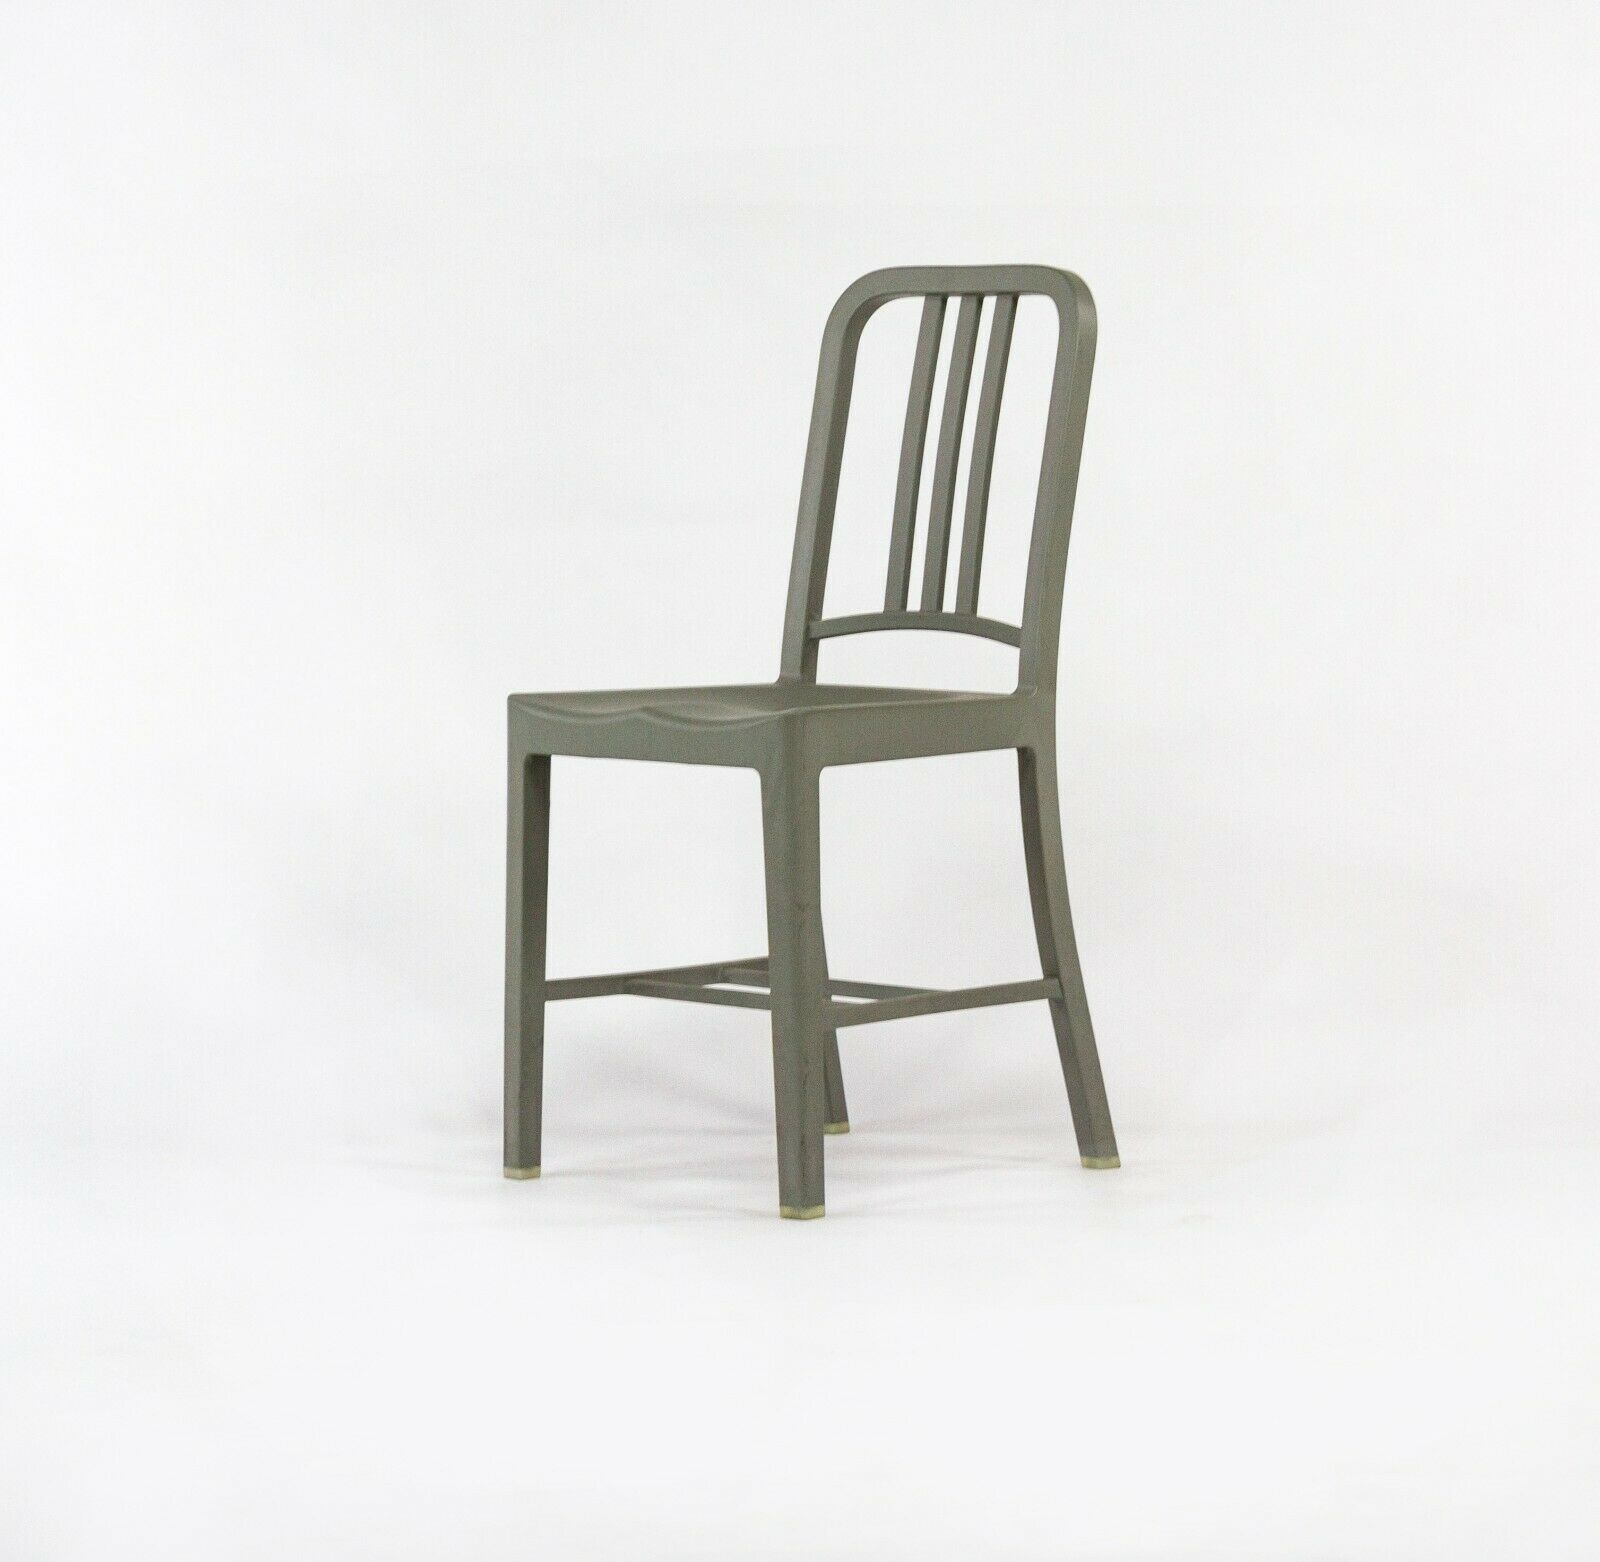 SOLD Emeco Coca-Cola 111 Navy Chair in Flint Gray Made From Recycled Plastic Bottles